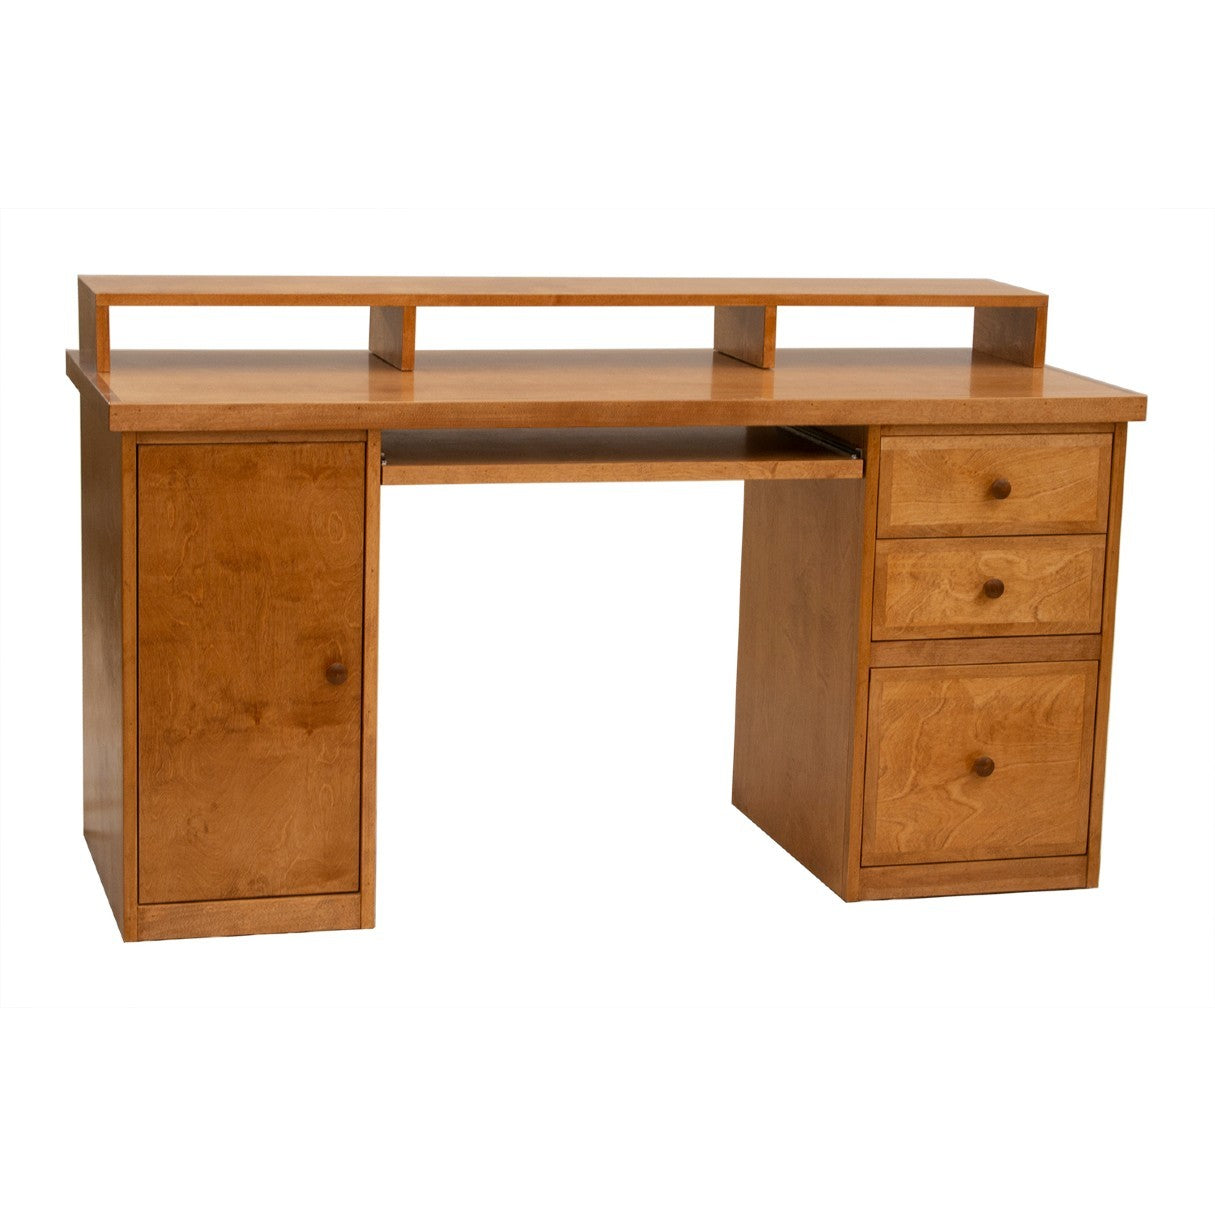 Berkshire Home Desk with Cabinet features three drawers, a cabinet with adjustable shelving, and a sliding tray. Shown in Meadow Oak finish.